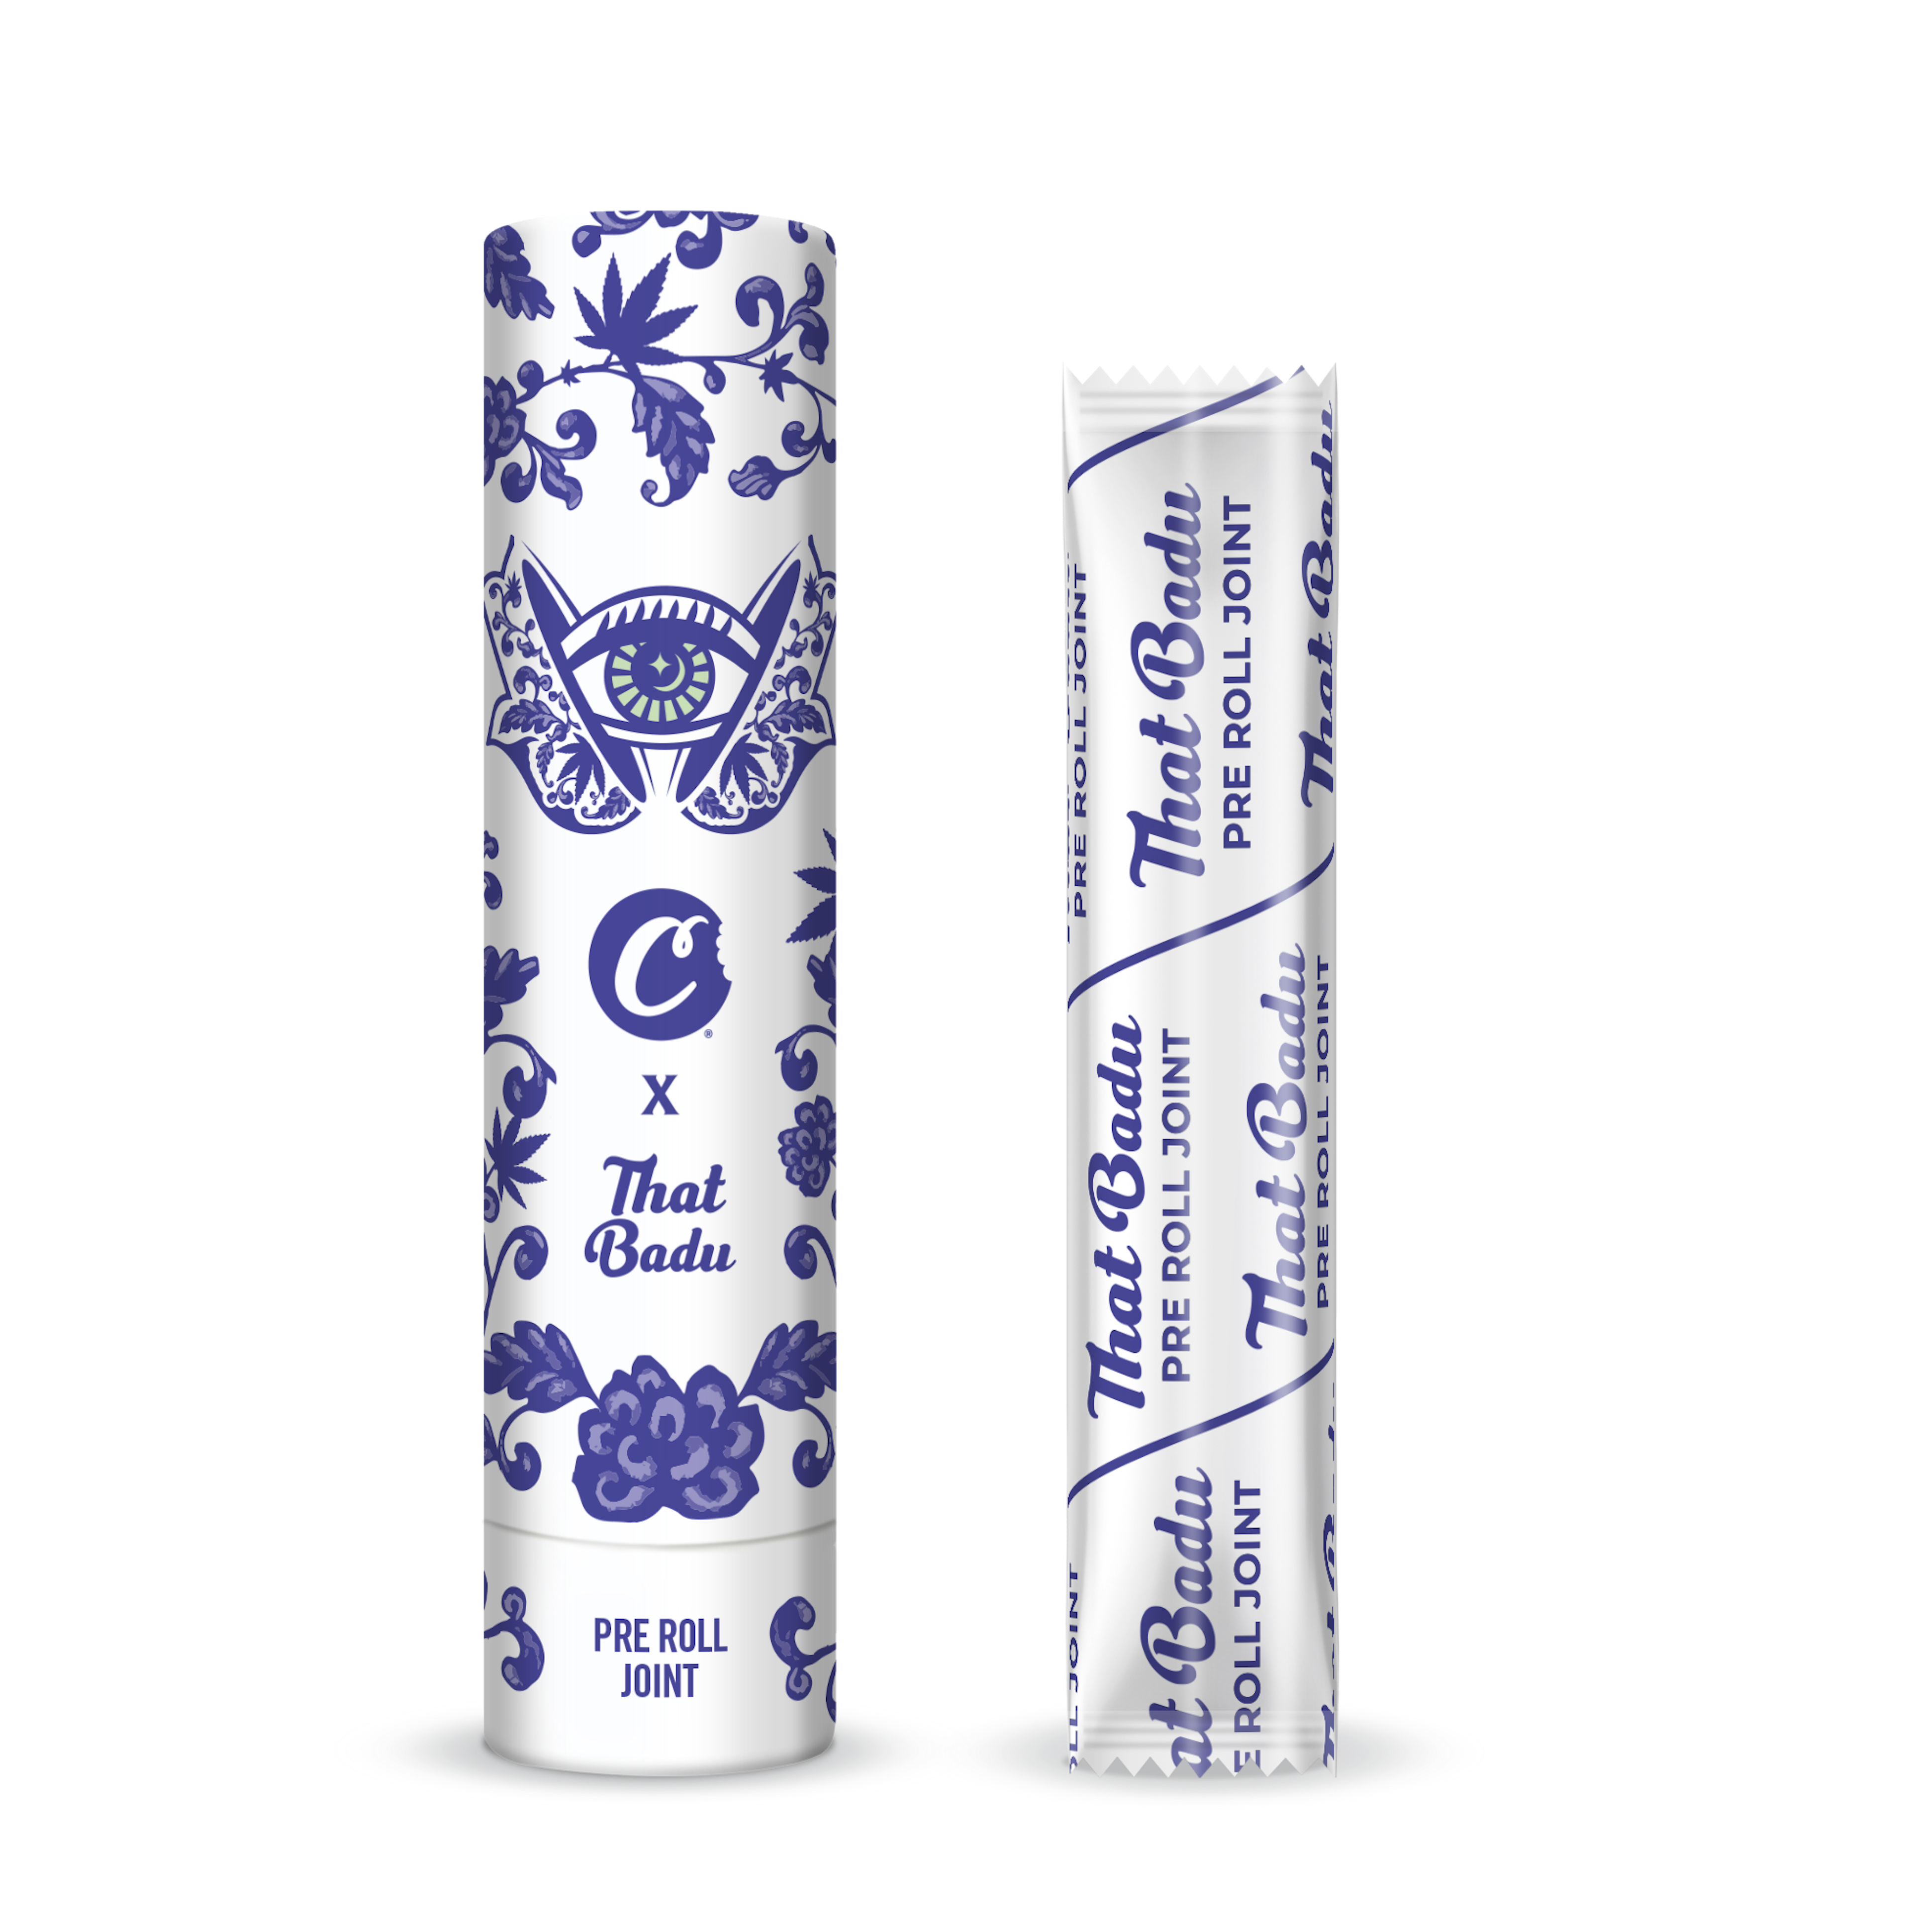 Cookies - That Badu - THC - Indoor - Non Infused - Joint - Preroll - Tube - 1g - CA